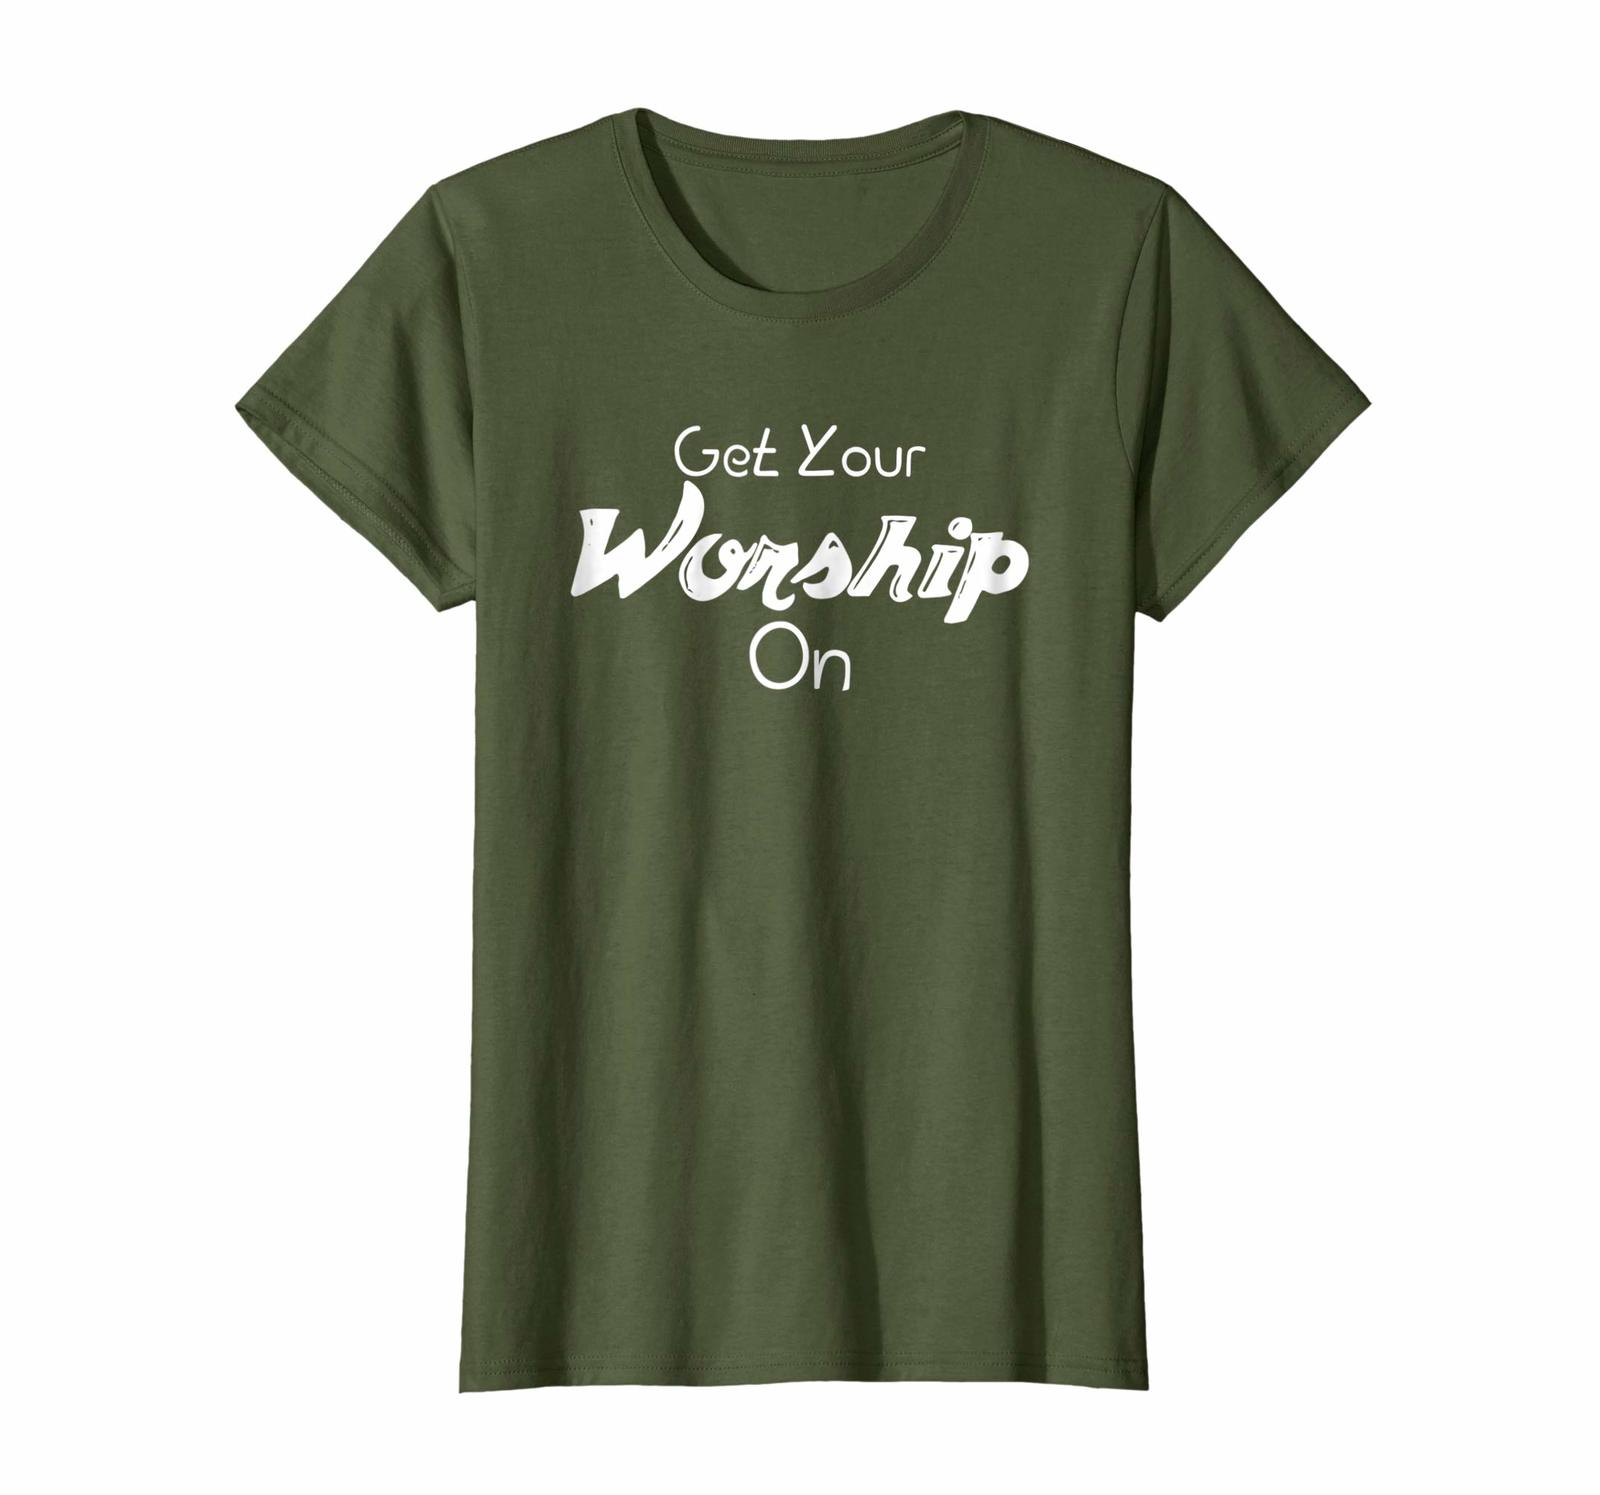 New Shirts - Get Your Worship On T-Shirt Funny Christian Gift idea ...